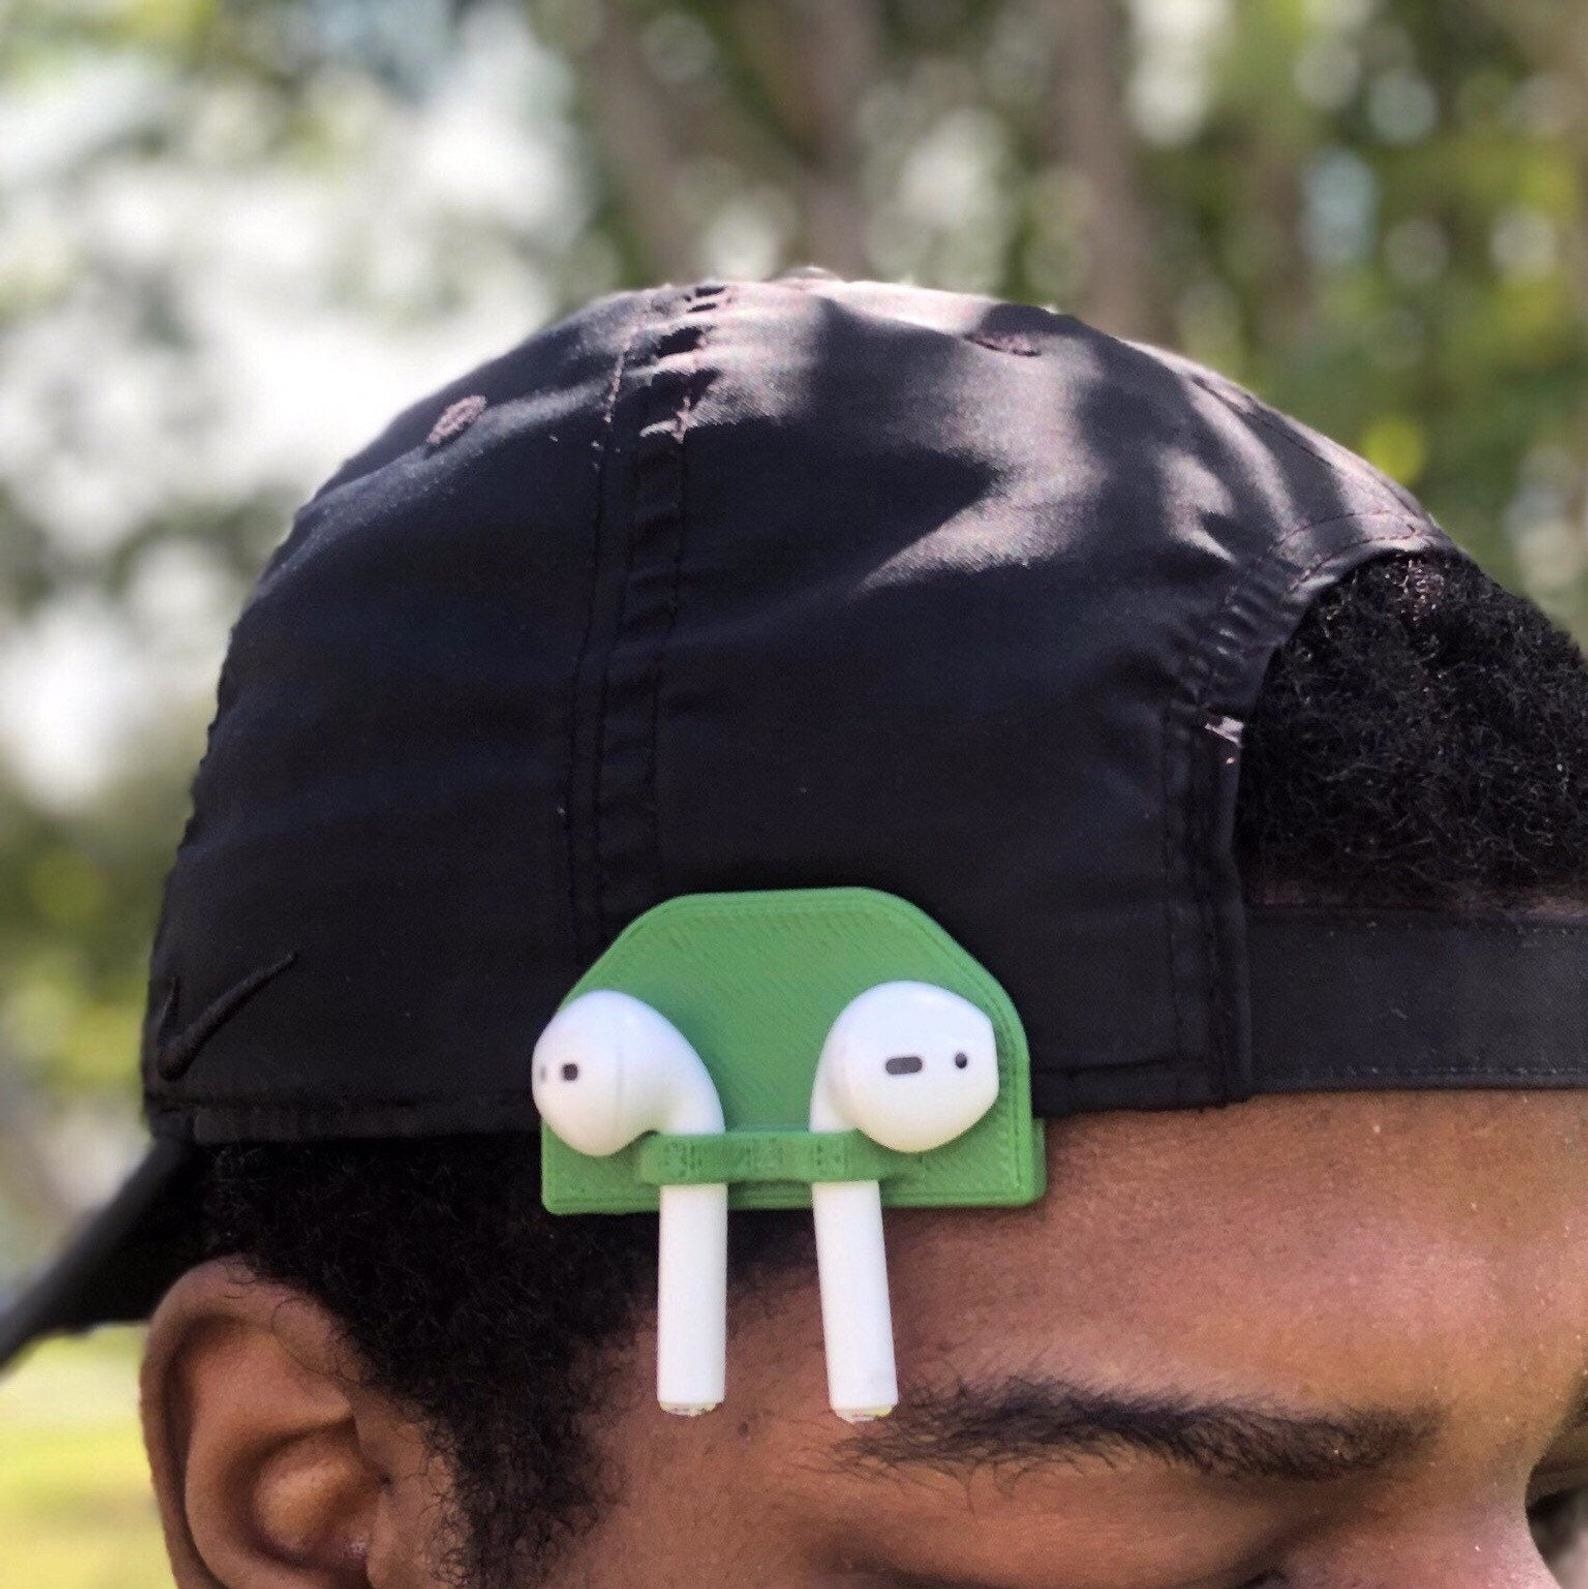 Model wearing green AirPod holder clipped onto hat